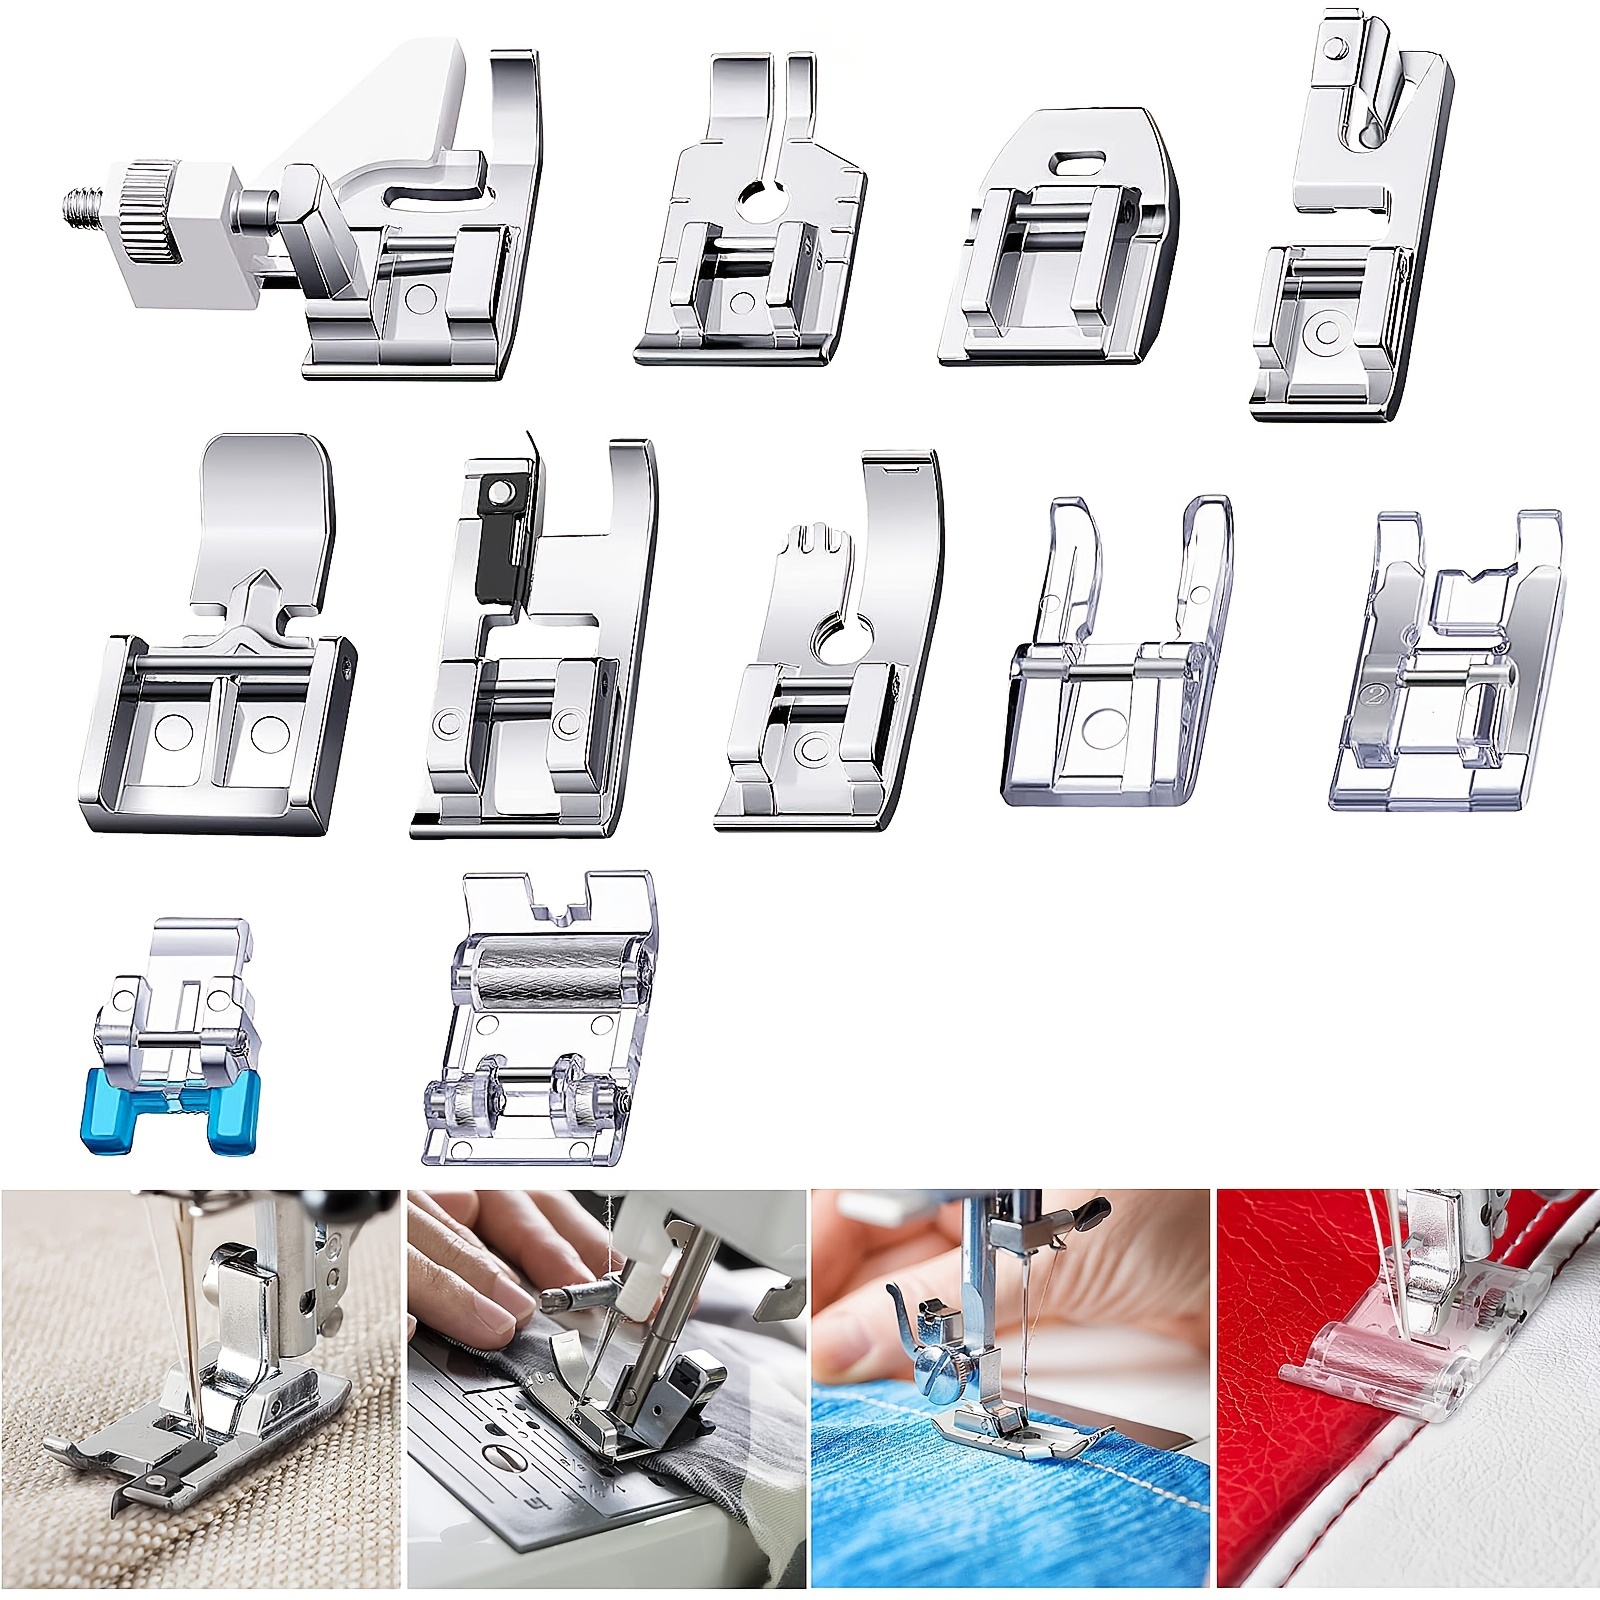 11ps Presser Feet Set | Sewing Machine Presser Foot | Brother Singer Janome Babylock Kenmore Low Shank Sewing Machine